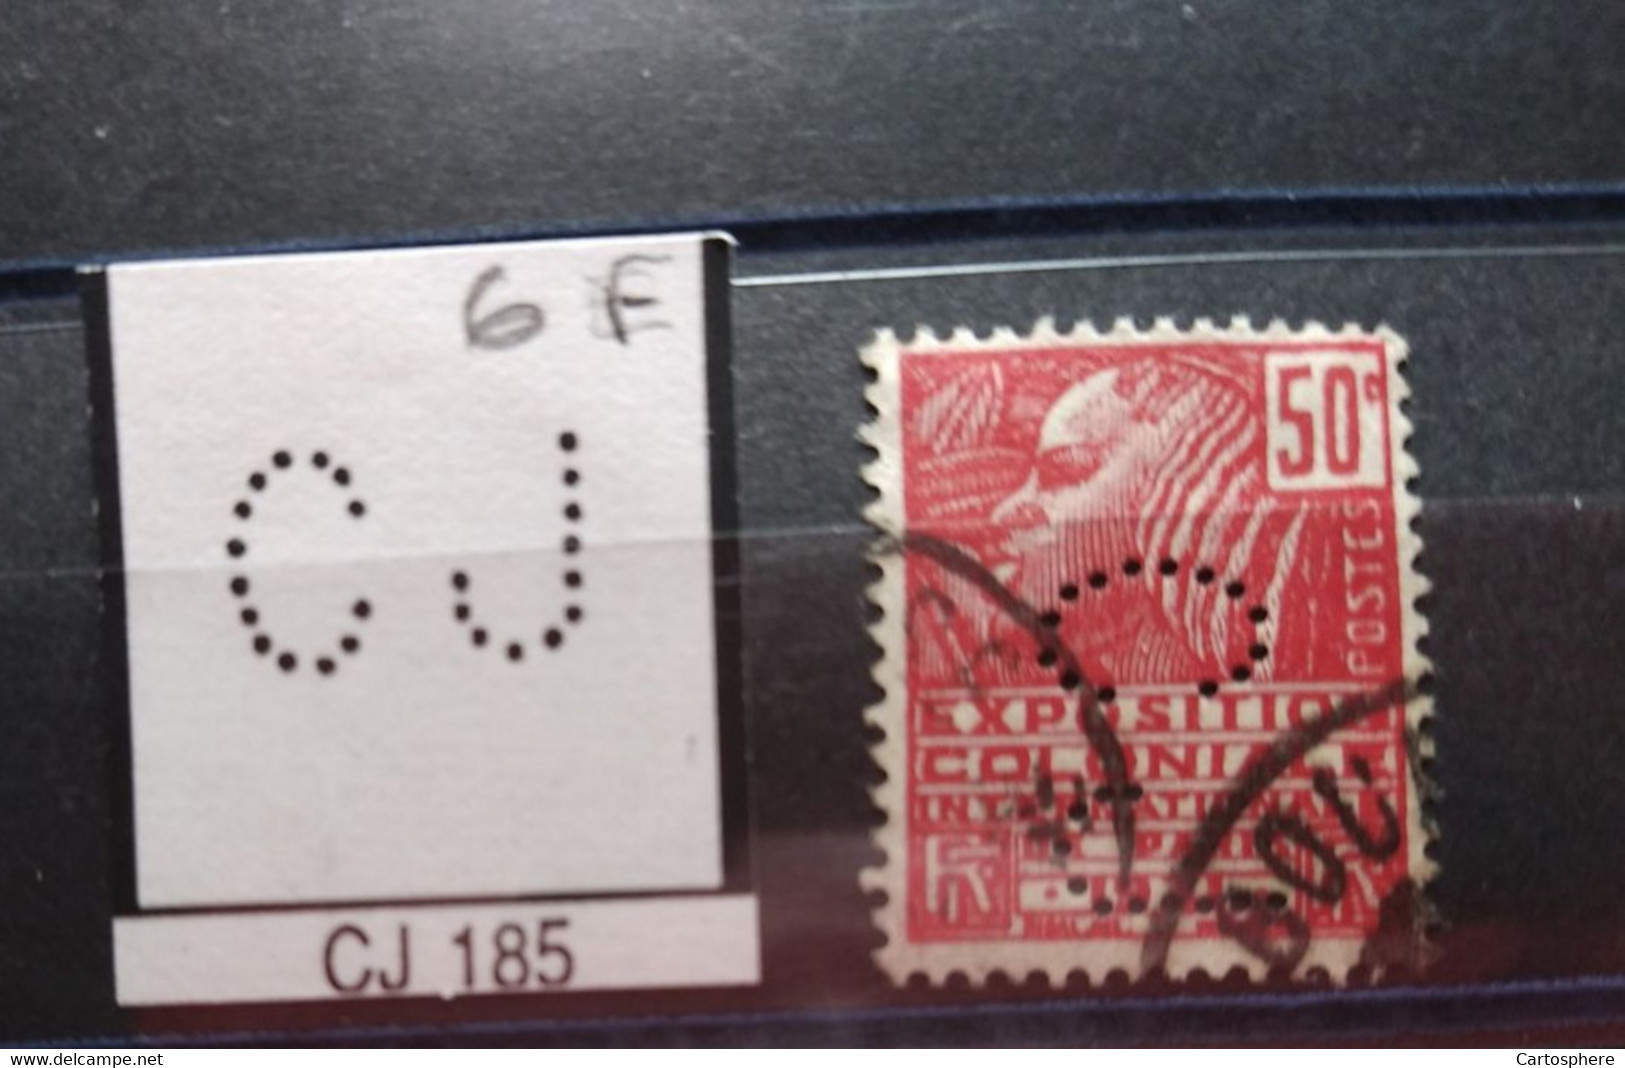 FRANCE TIMBRE CJ 185  INDICE 5 SUR 272 PERFORE PERFORES PERFIN PERFINS PERFO PERFORATION PERFORIERT - Used Stamps